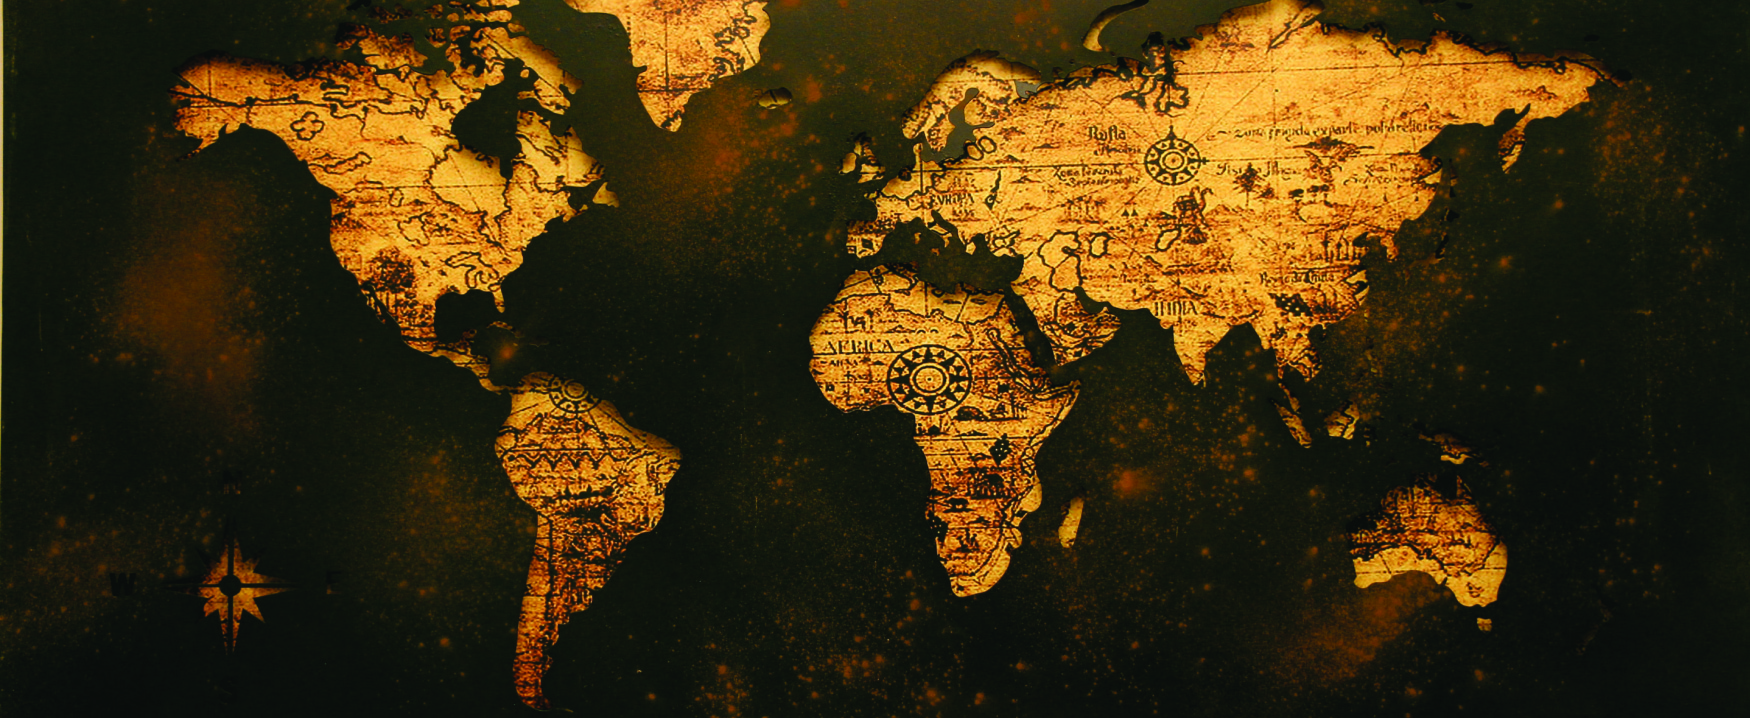 This image shows a map of the world on a dark background with the continents cutout to reveal a lighter color.